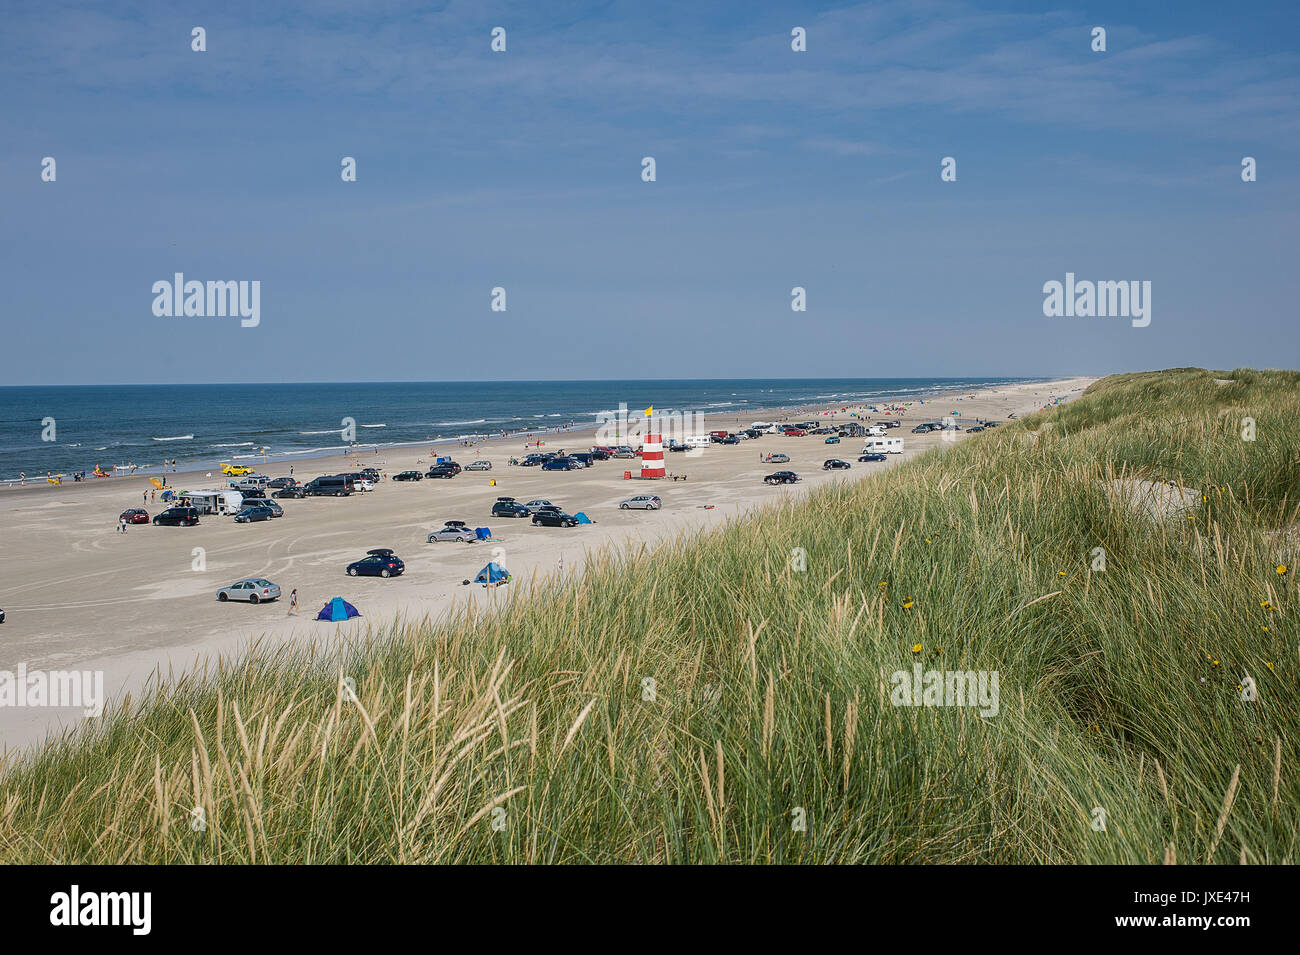 Henne Strand, beach open to automobiles in the South of Denmark Stock Photo